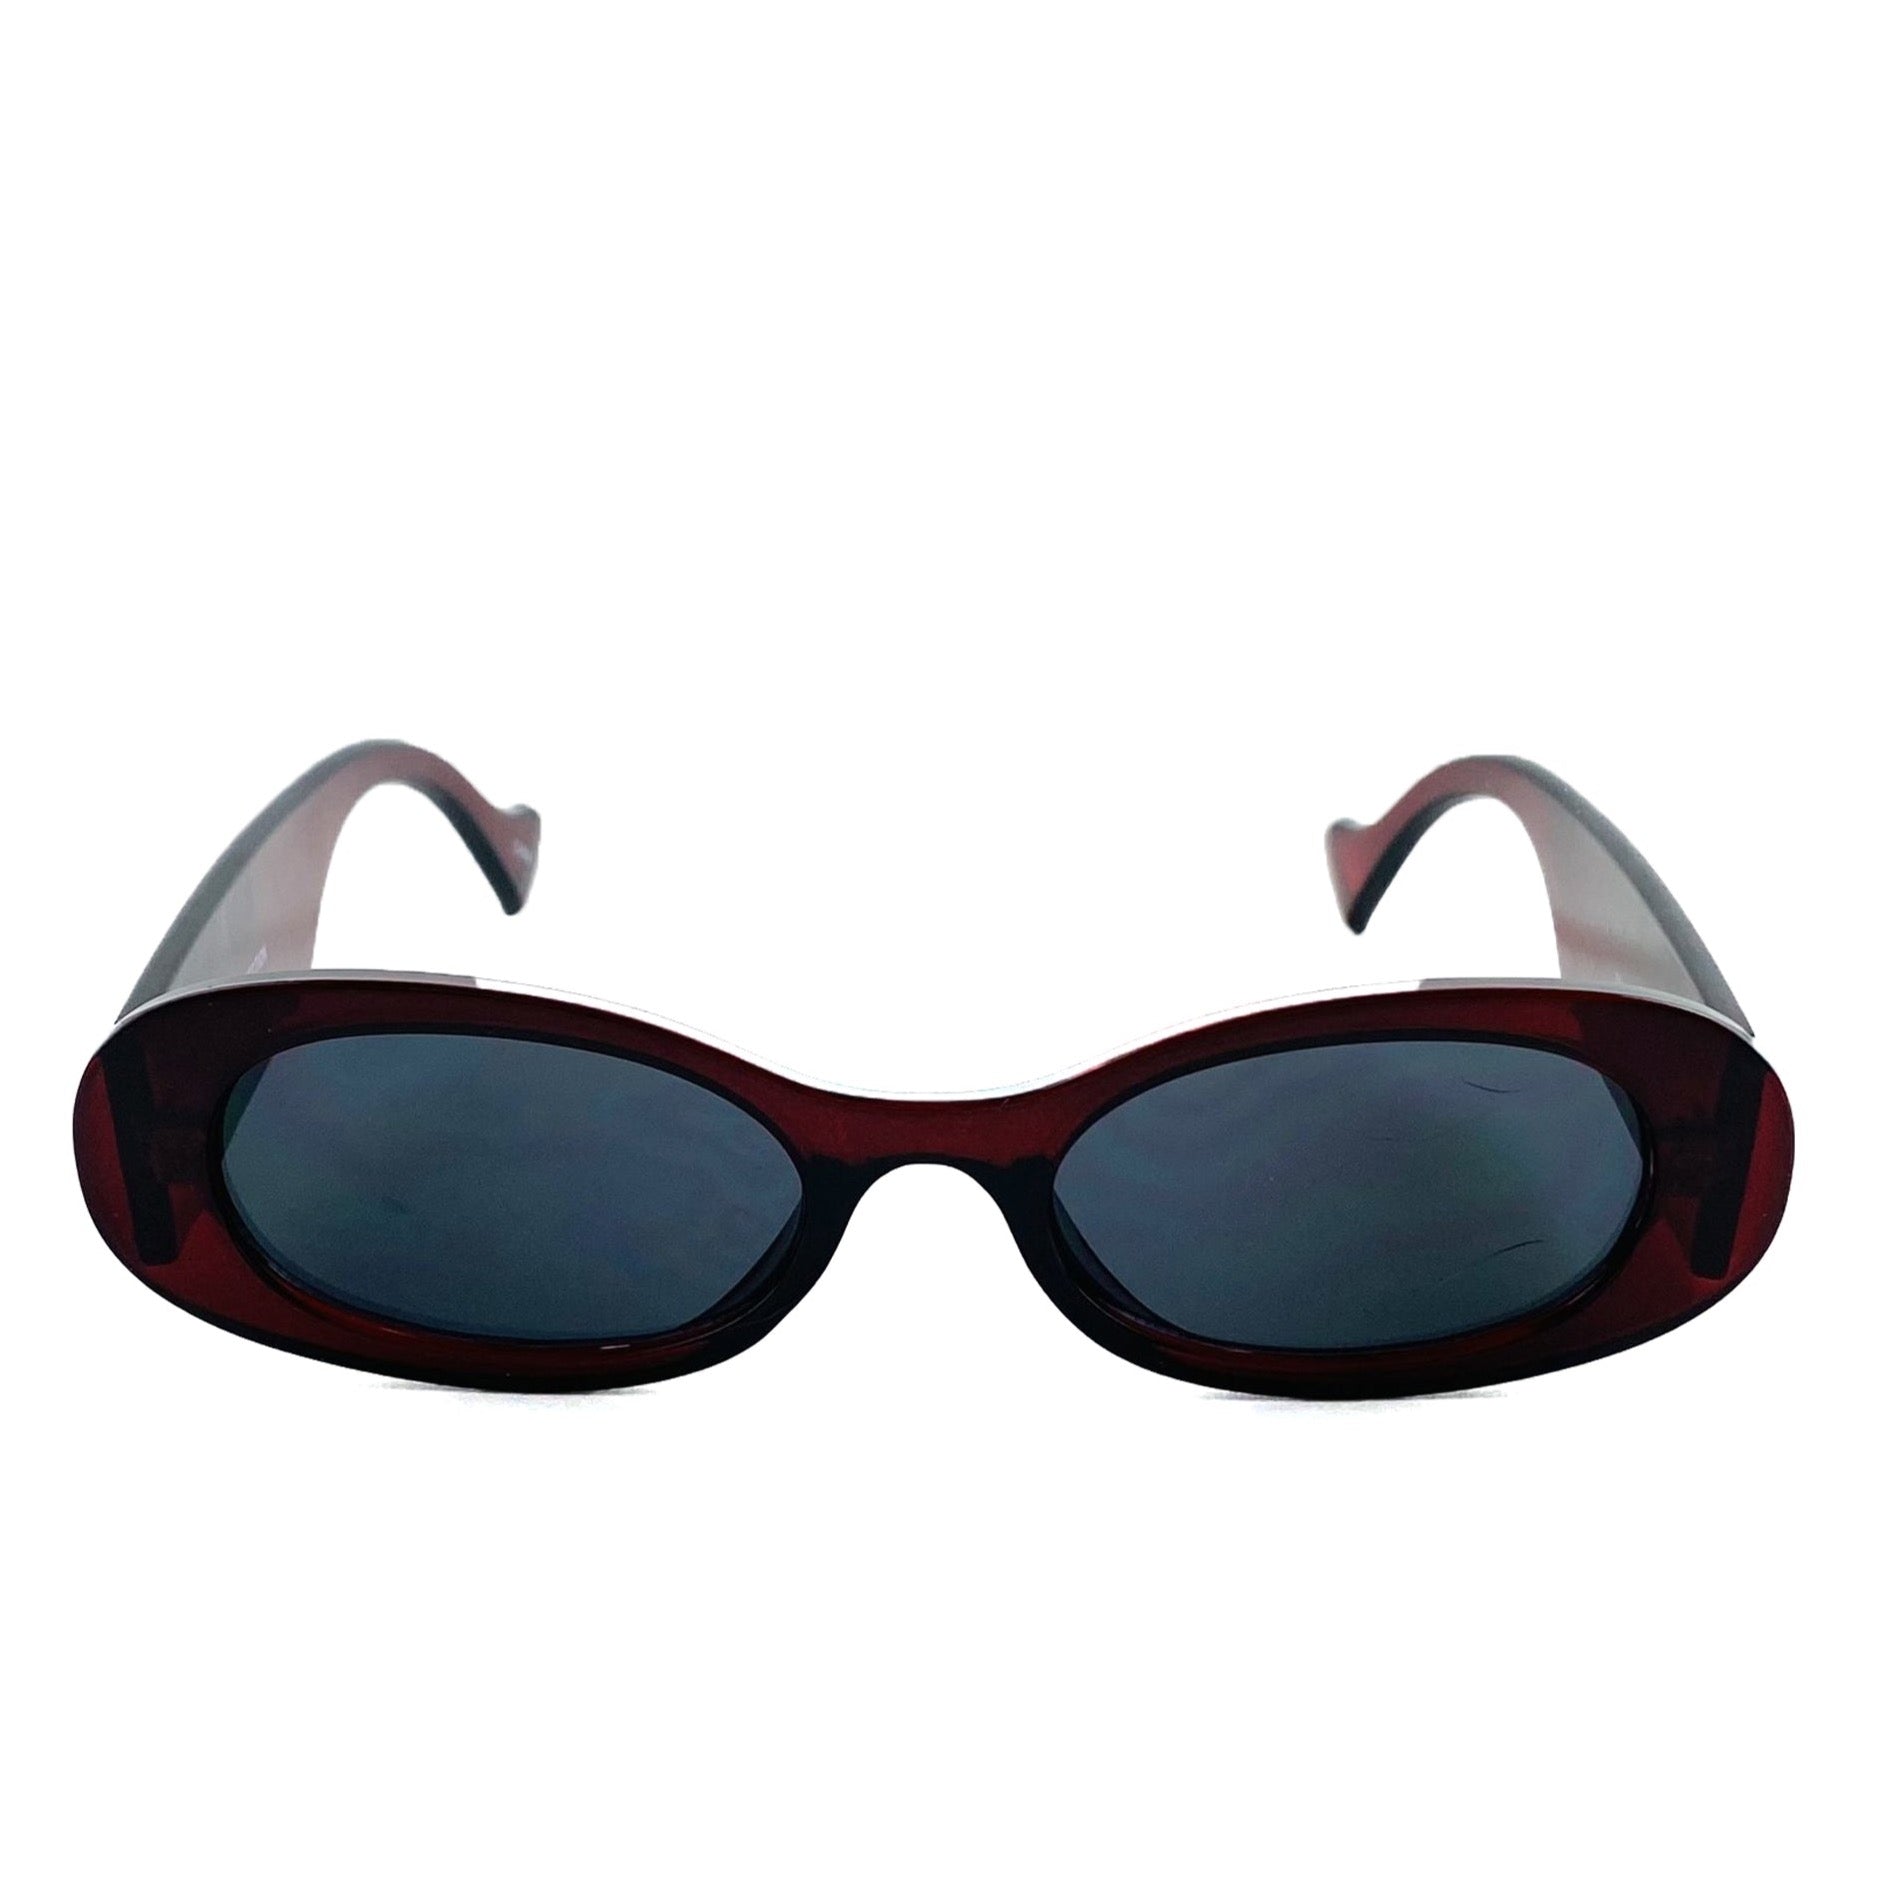 Authentic oversized mod style retro red sunglasses with thick frame and dark lenses